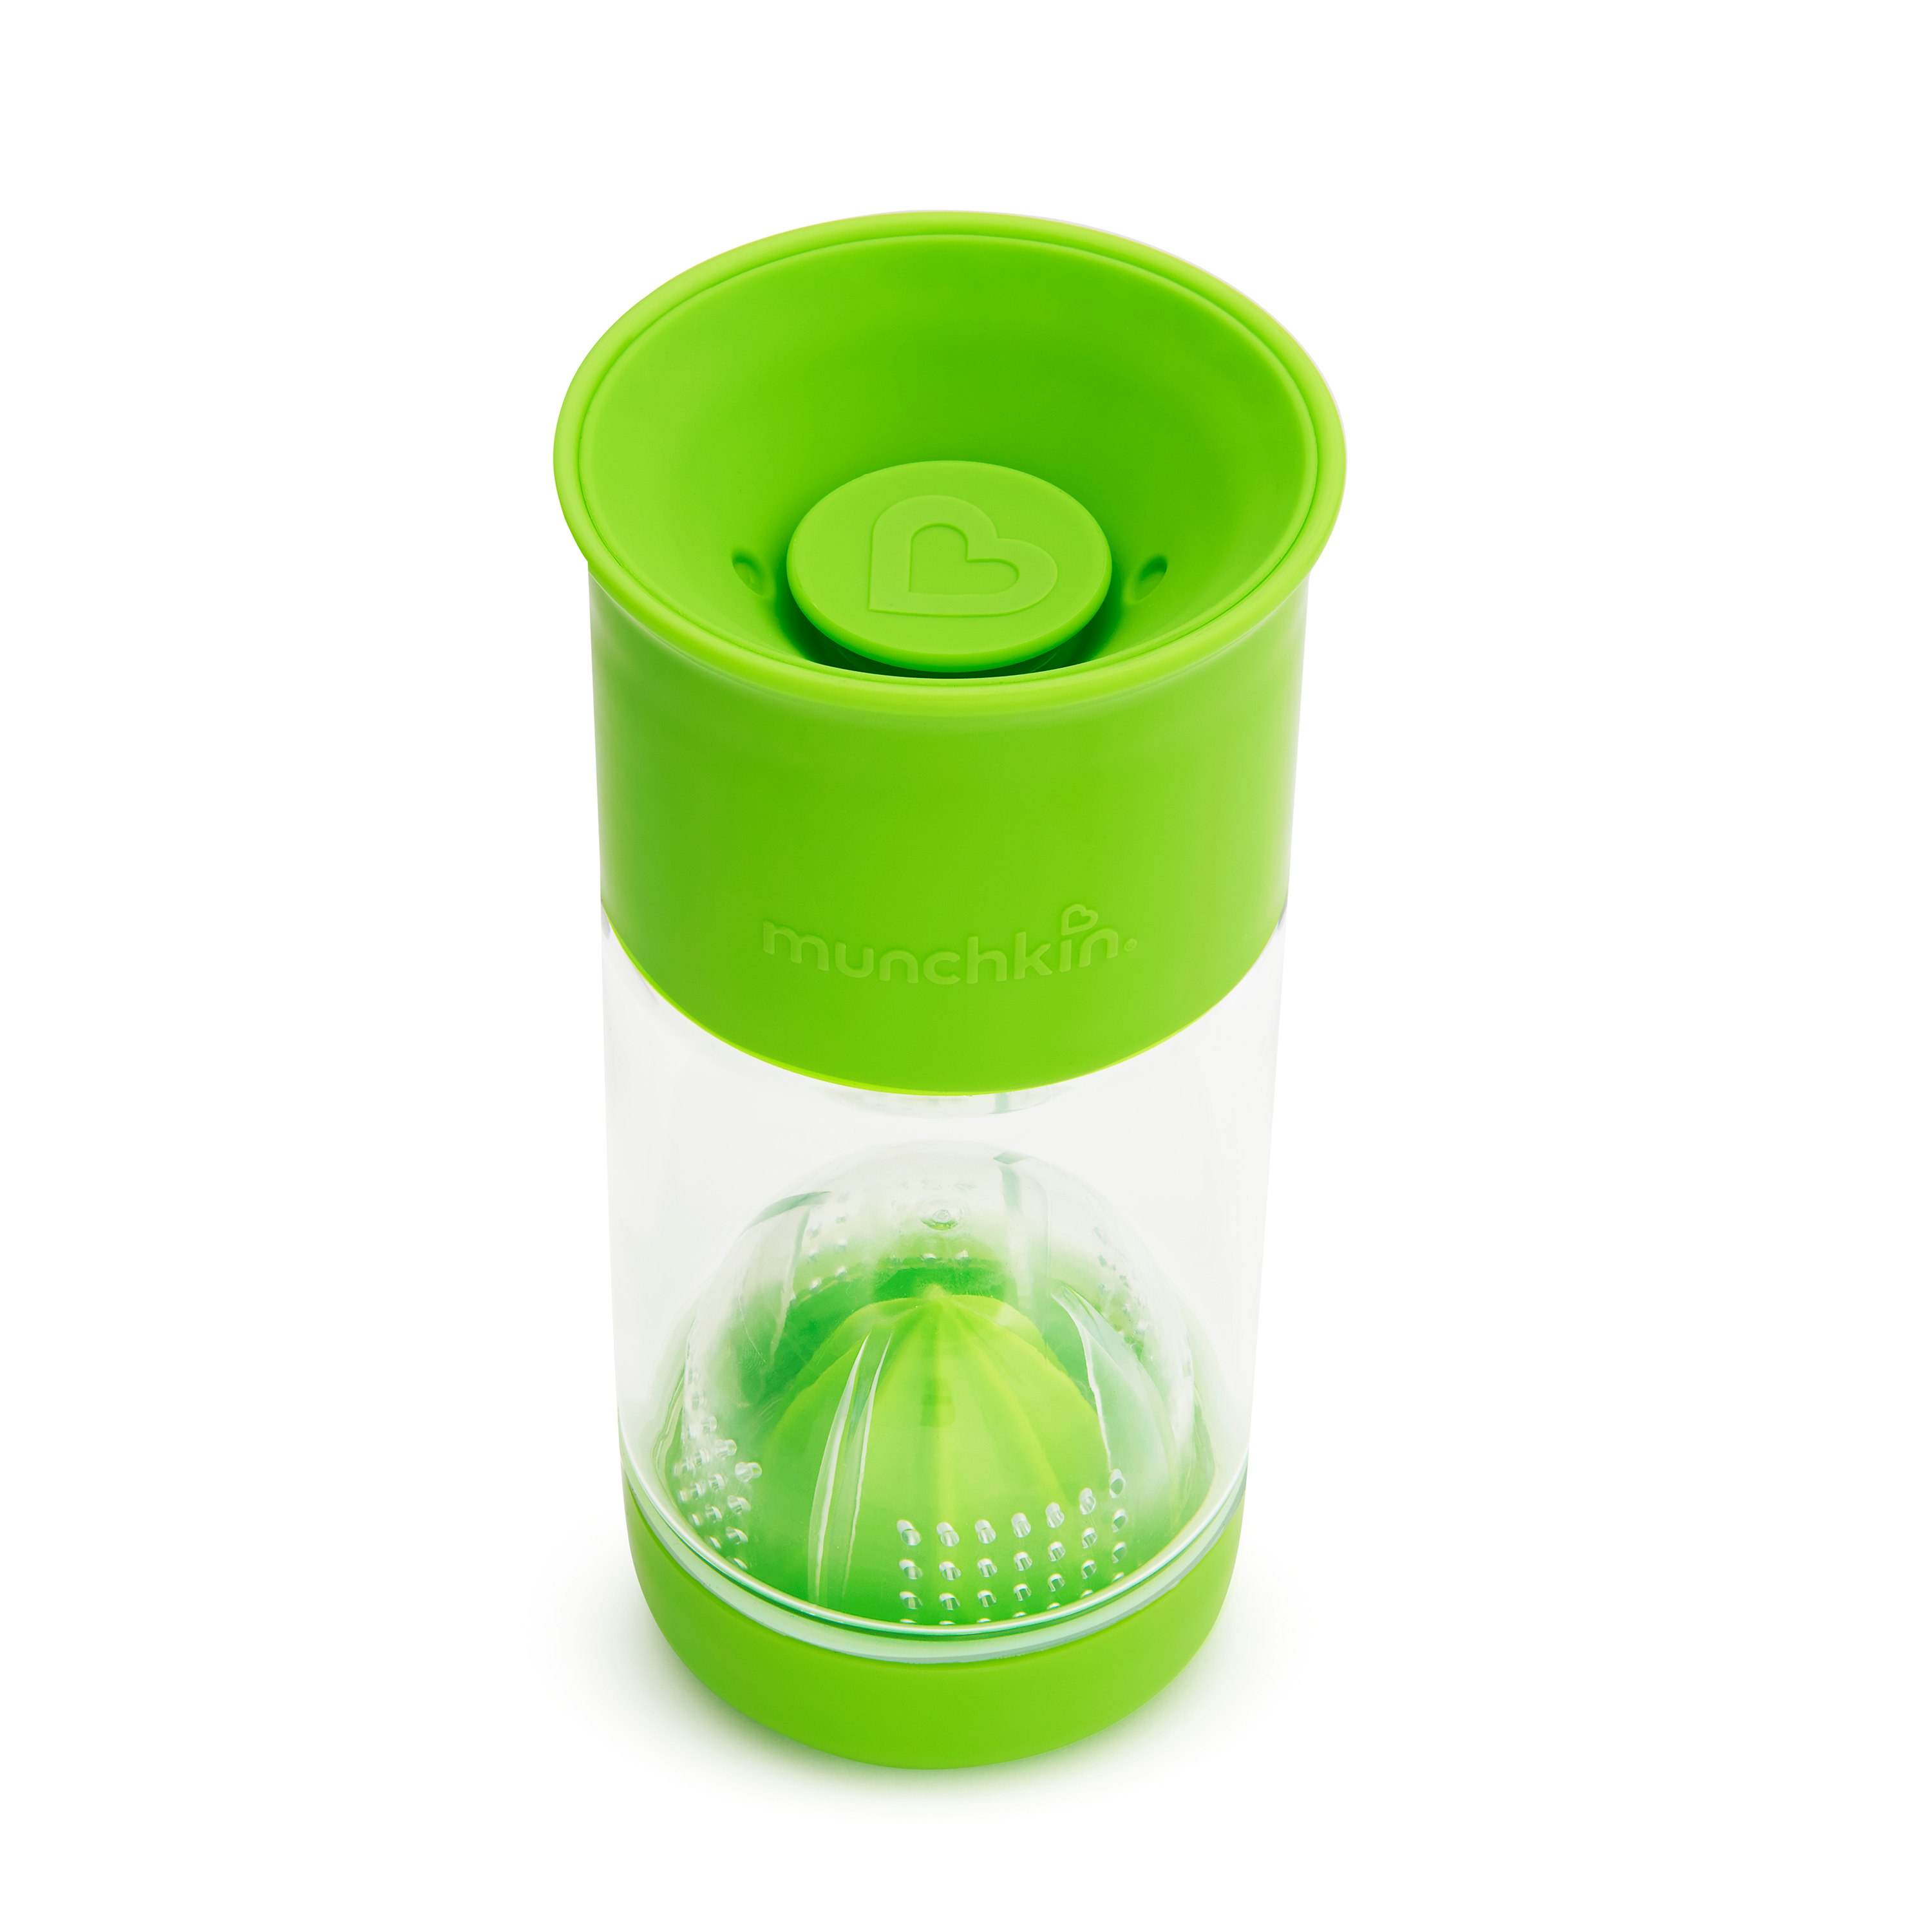 https://images.bauerhosting.com/affiliates/sites/12/motherandbaby/legacy/root/munchkin-miracle-360-fruit-infuser-cup.jpg?ar=16%3A9&fit=crop&crop=top&auto=format&w=undefined&q=80